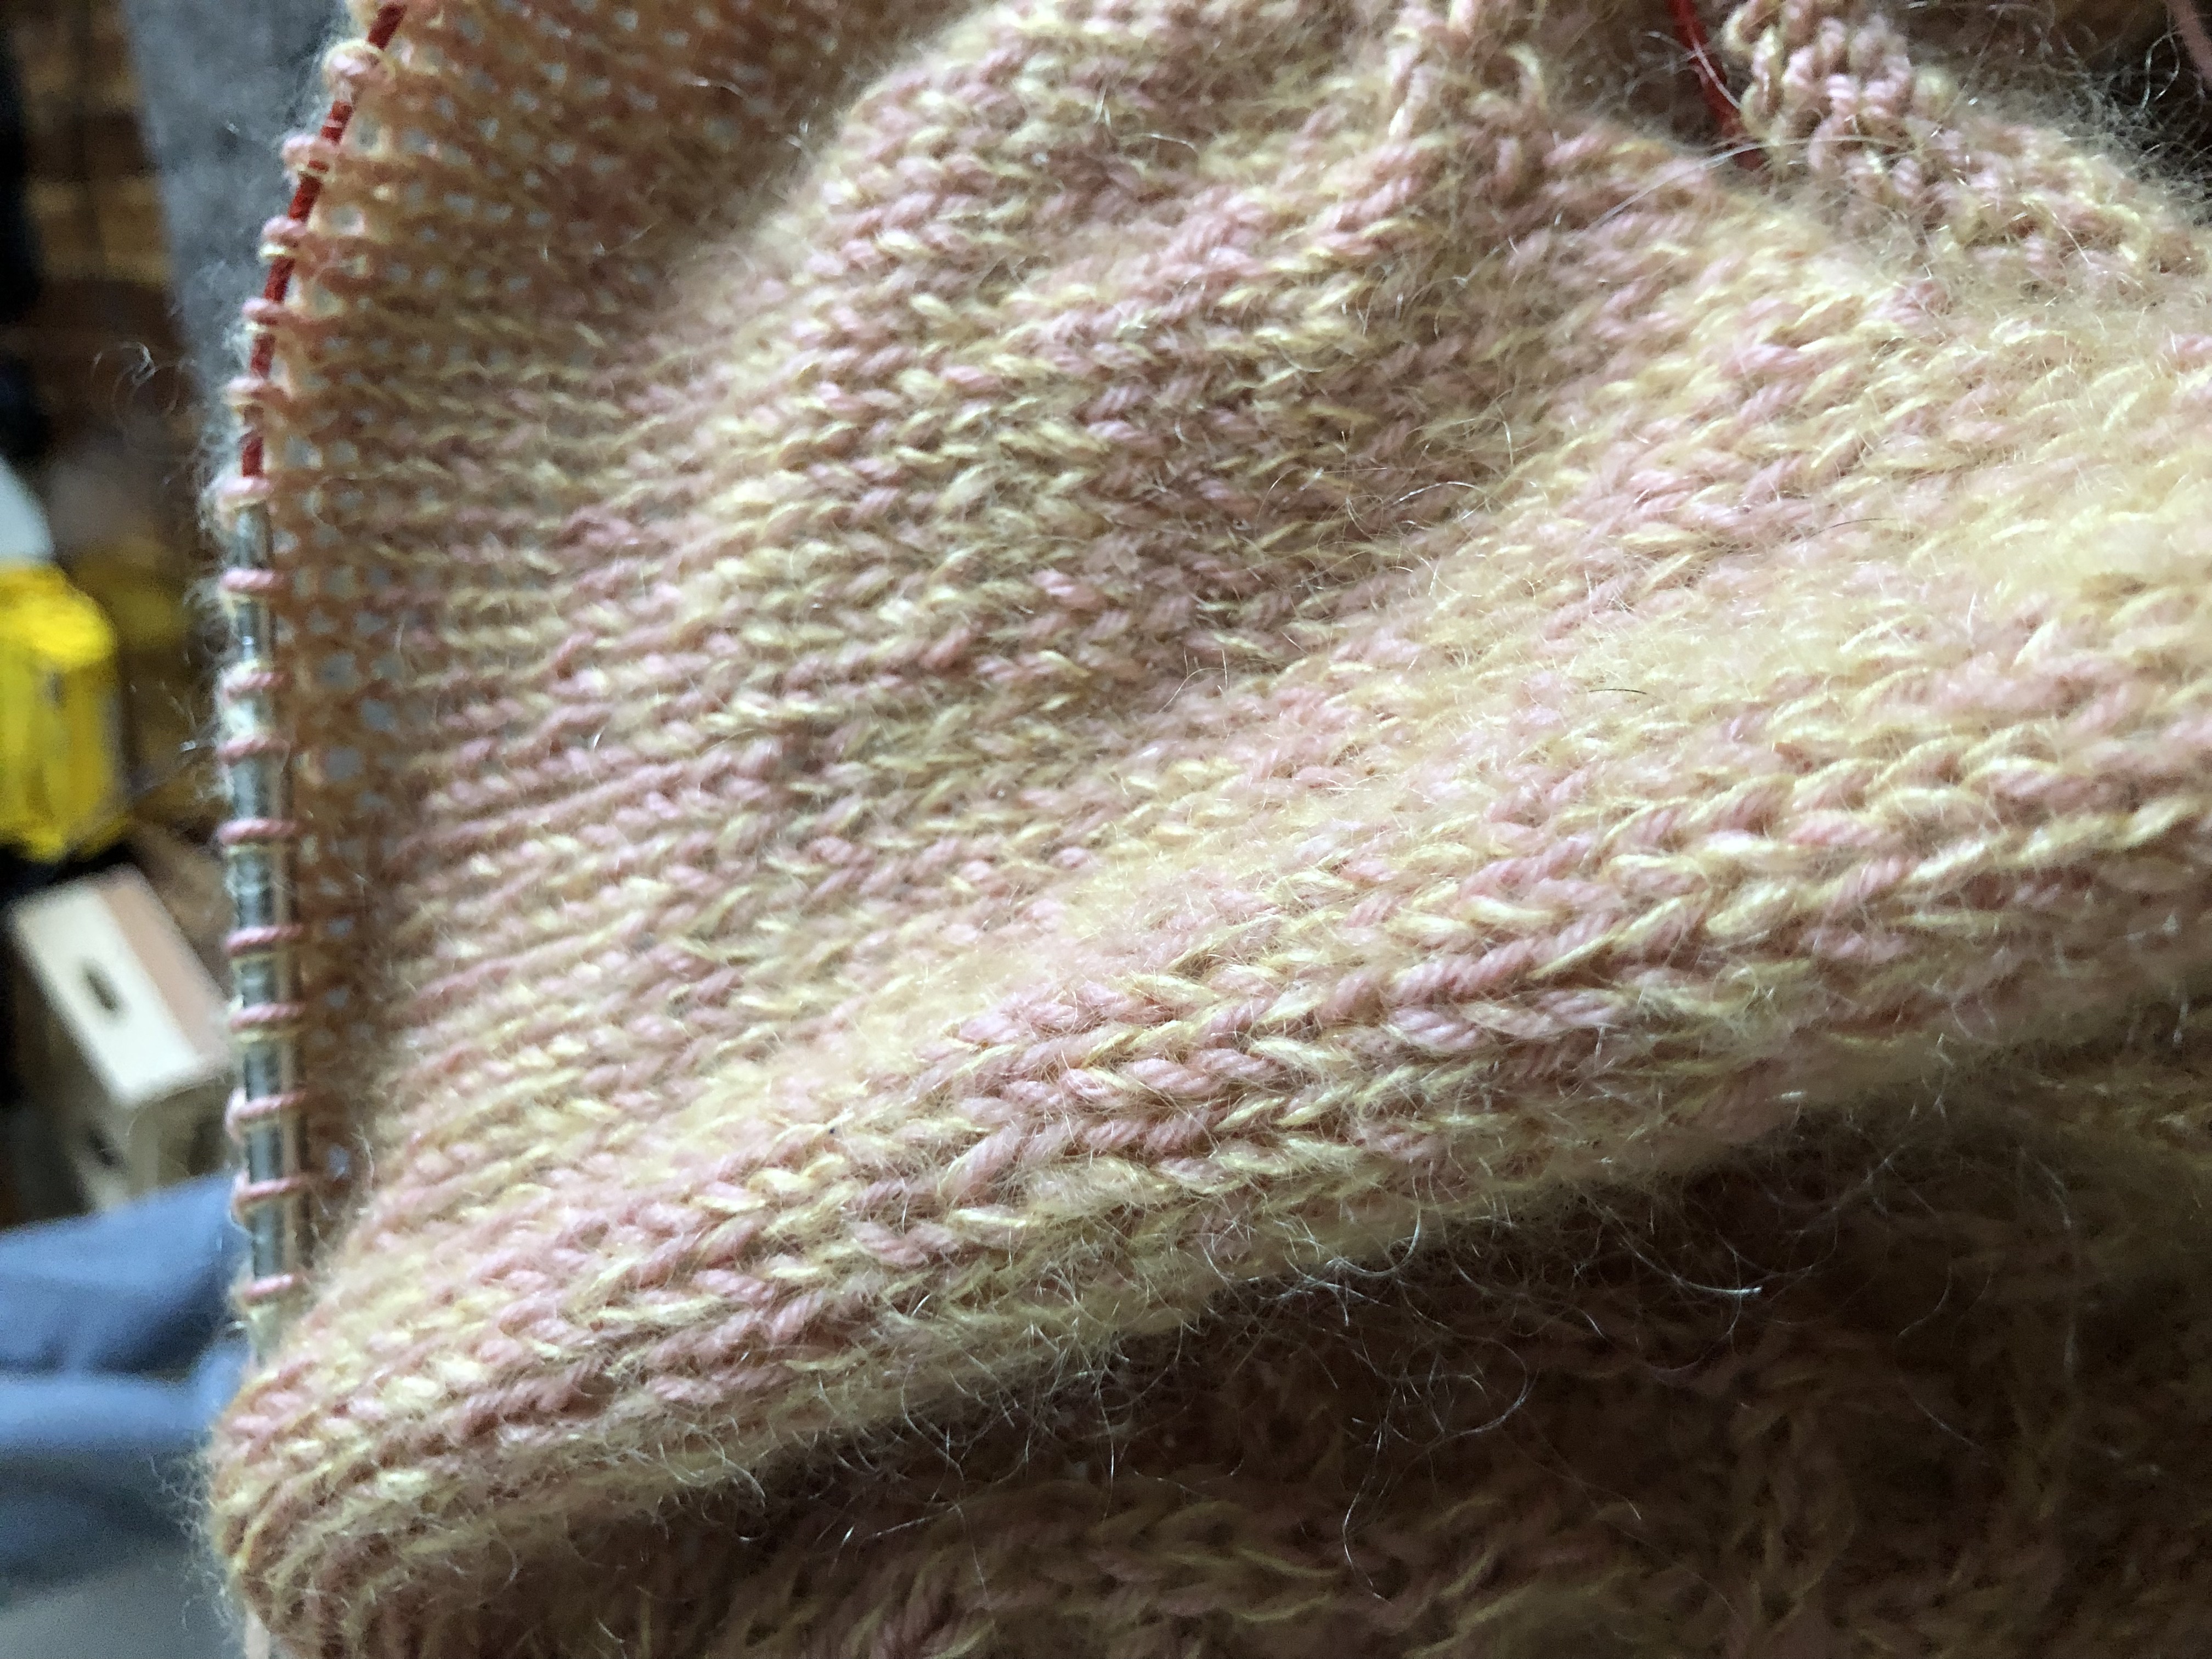 Close up photo of the knit with yellow mohair and pink wool fingering yarn.